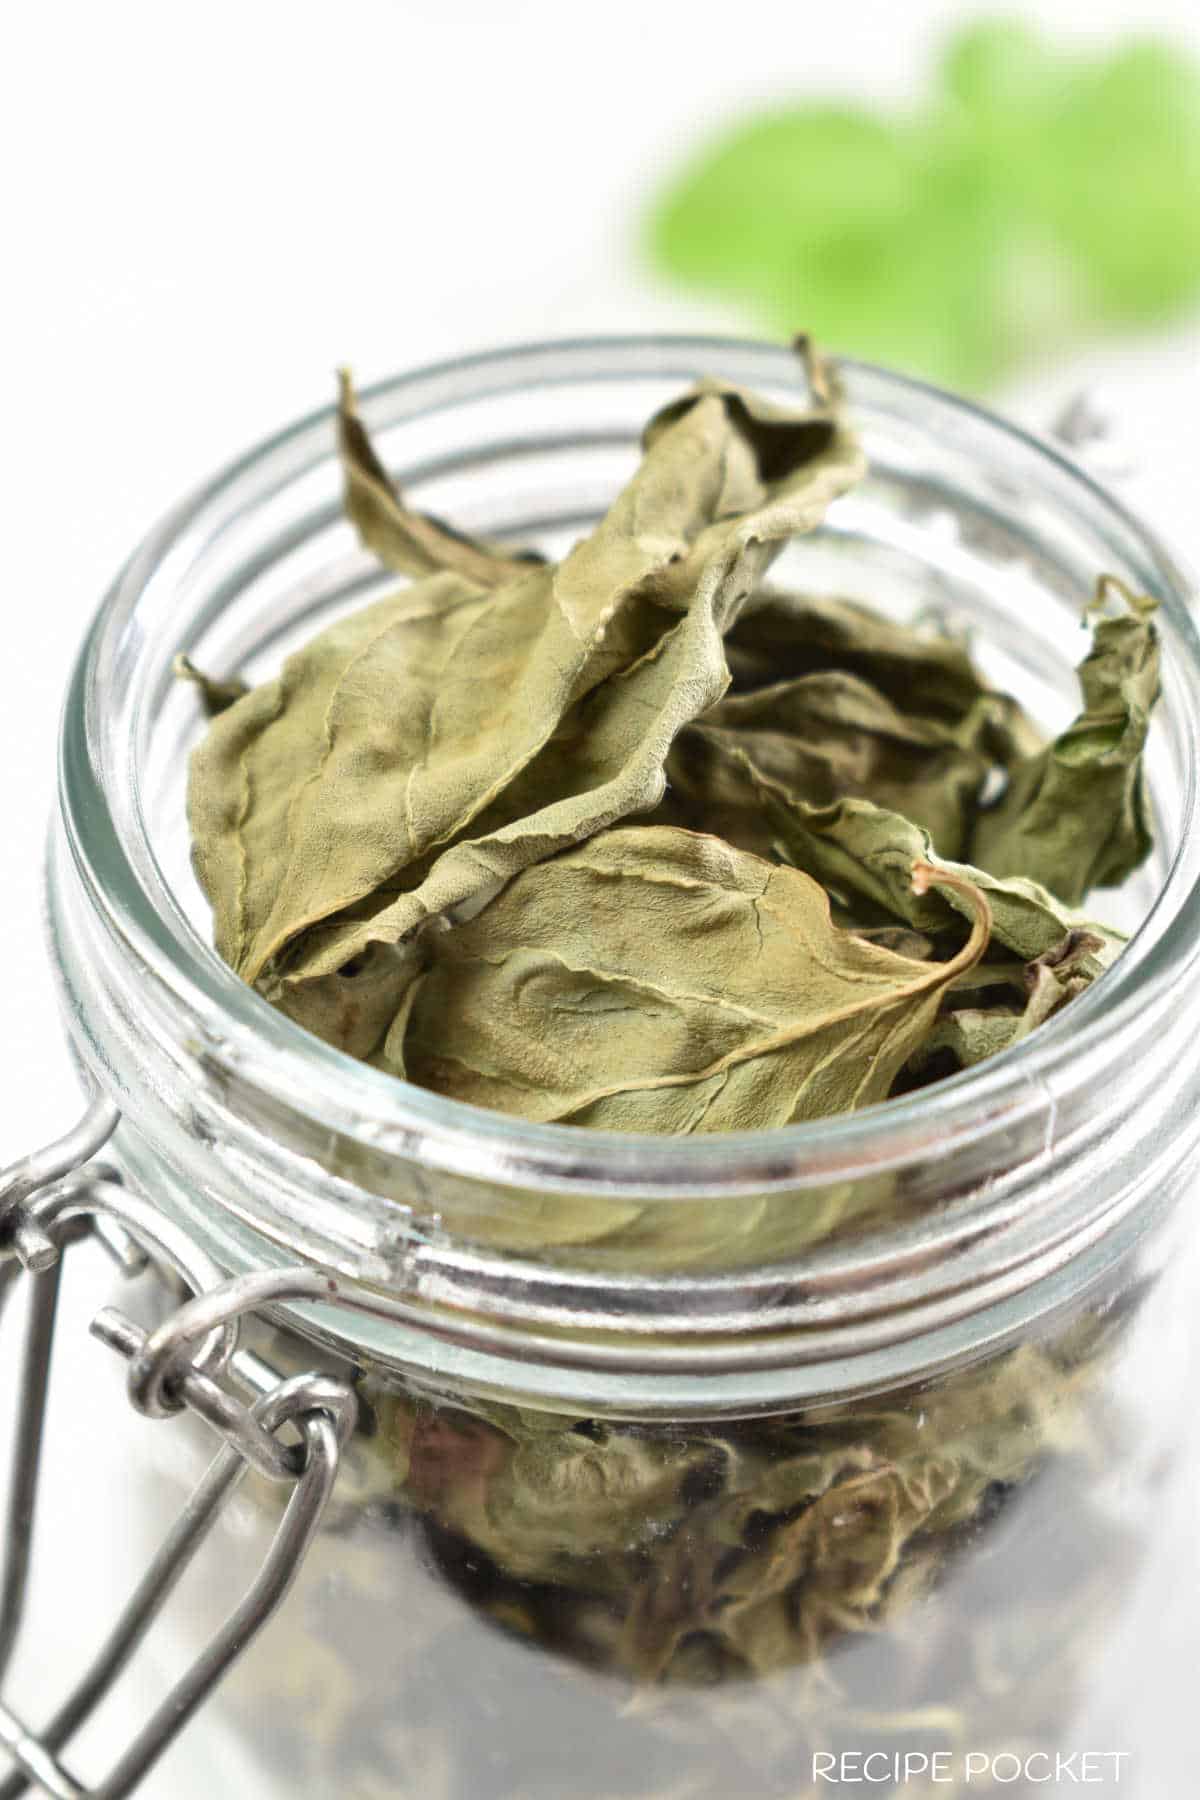 Whole dried basil leaves in a jar.